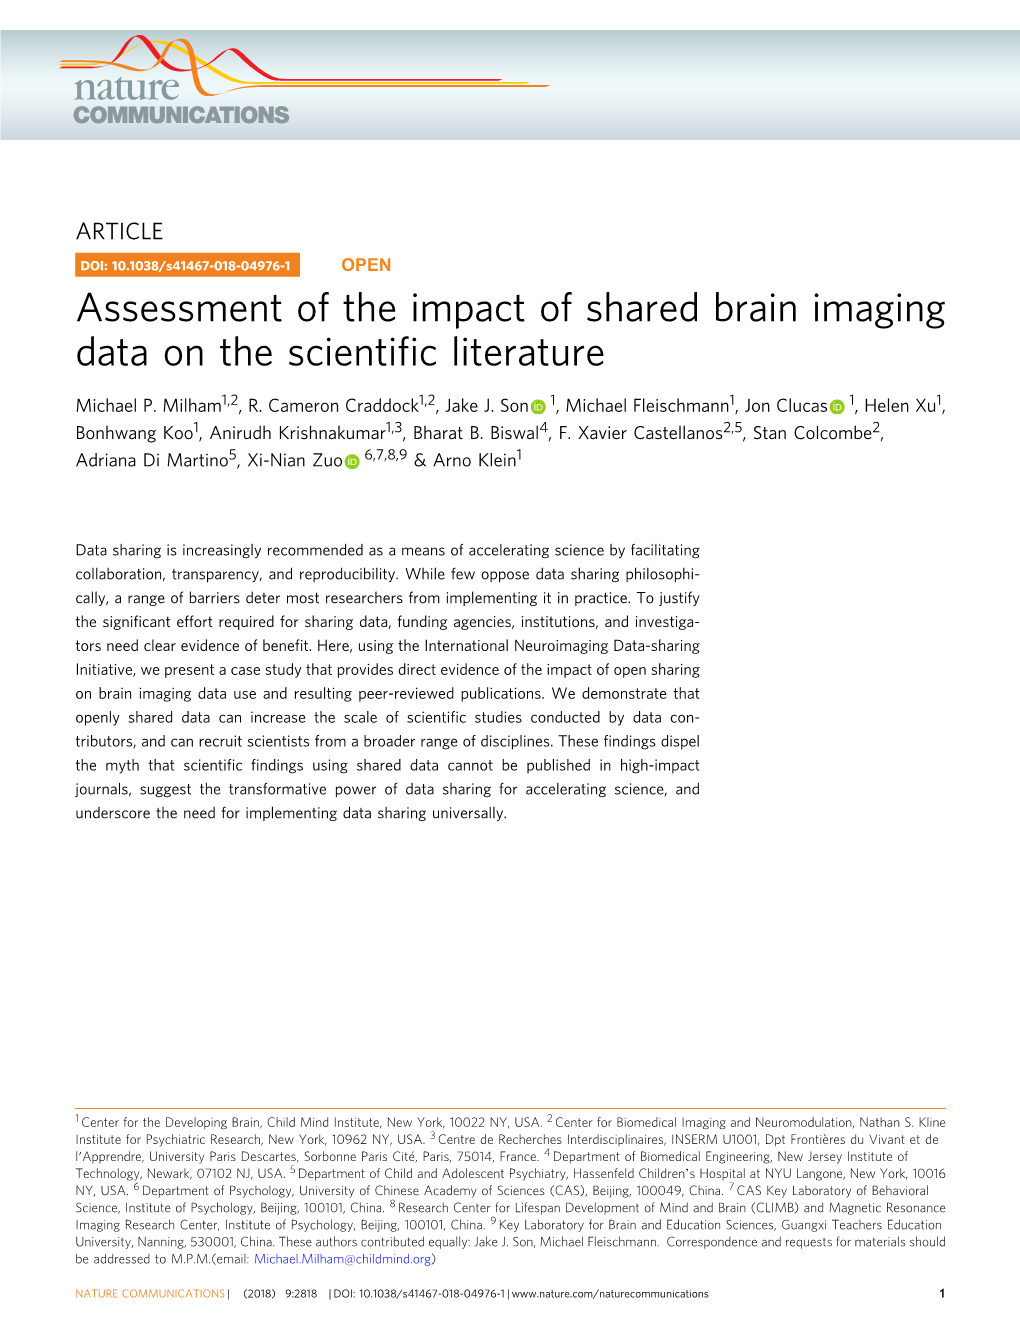 Assessment of the Impact of Shared Brain Imaging Data on the Scientific Literature